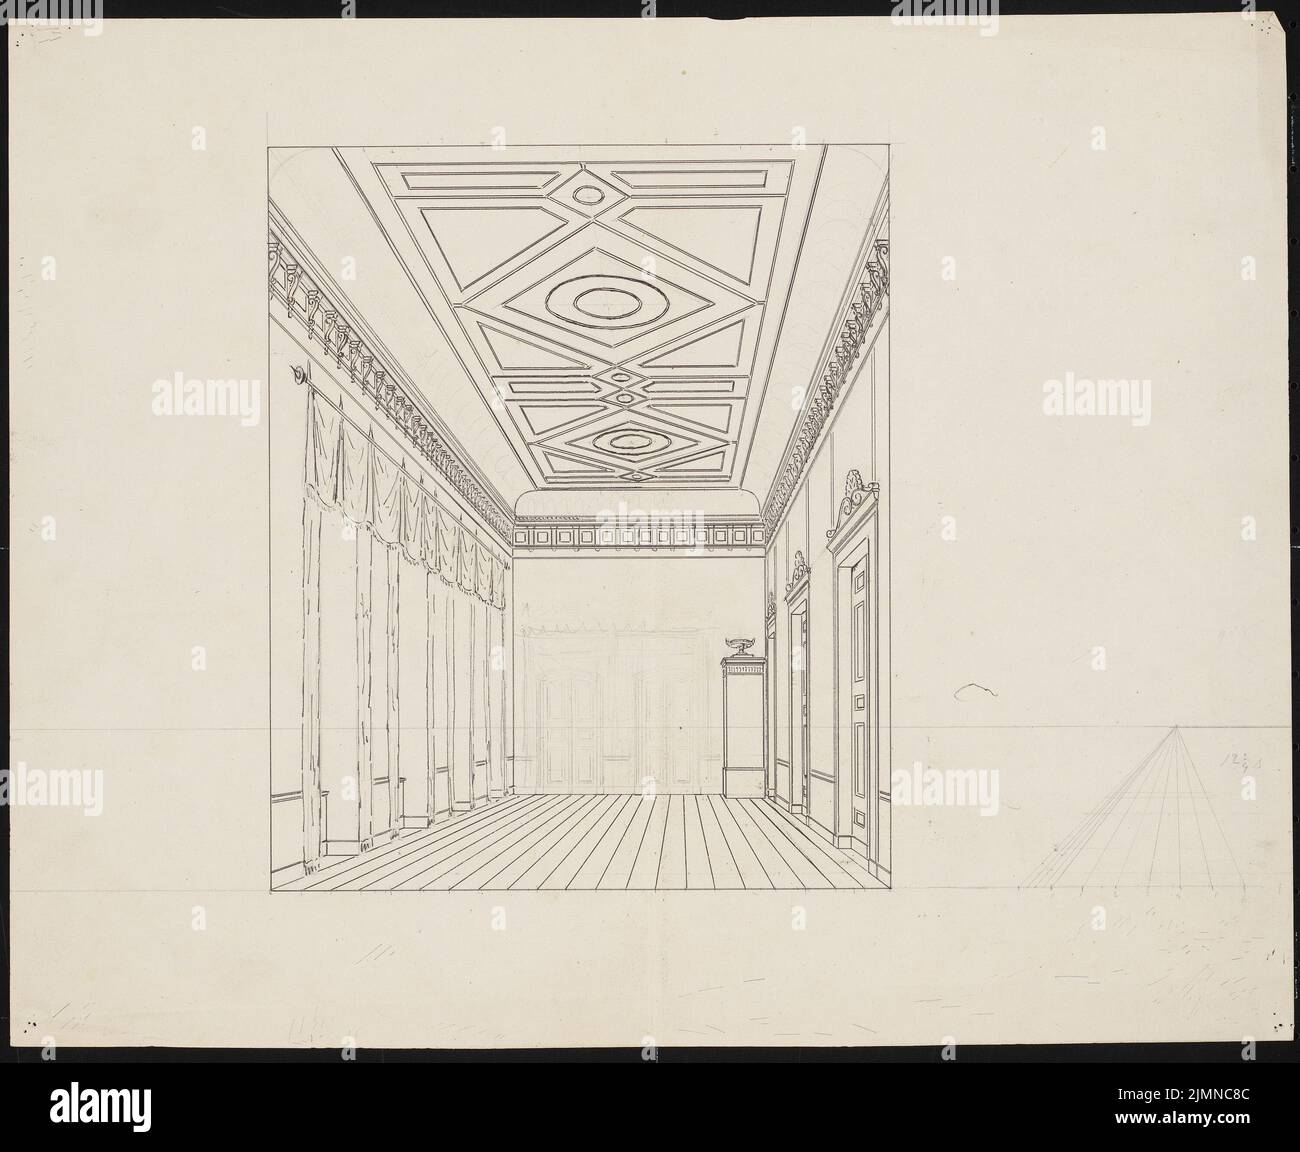 Knoblauch Eduard (1801-1865), Russian embassy, Berlin (1840-1841): Perspective view of the game hall on the 1st floor, towards the west. Pencil drawing, ink on paper, supplemented with pencil, 35.4 x 43.3 cm (including scan edges) Stock Photo